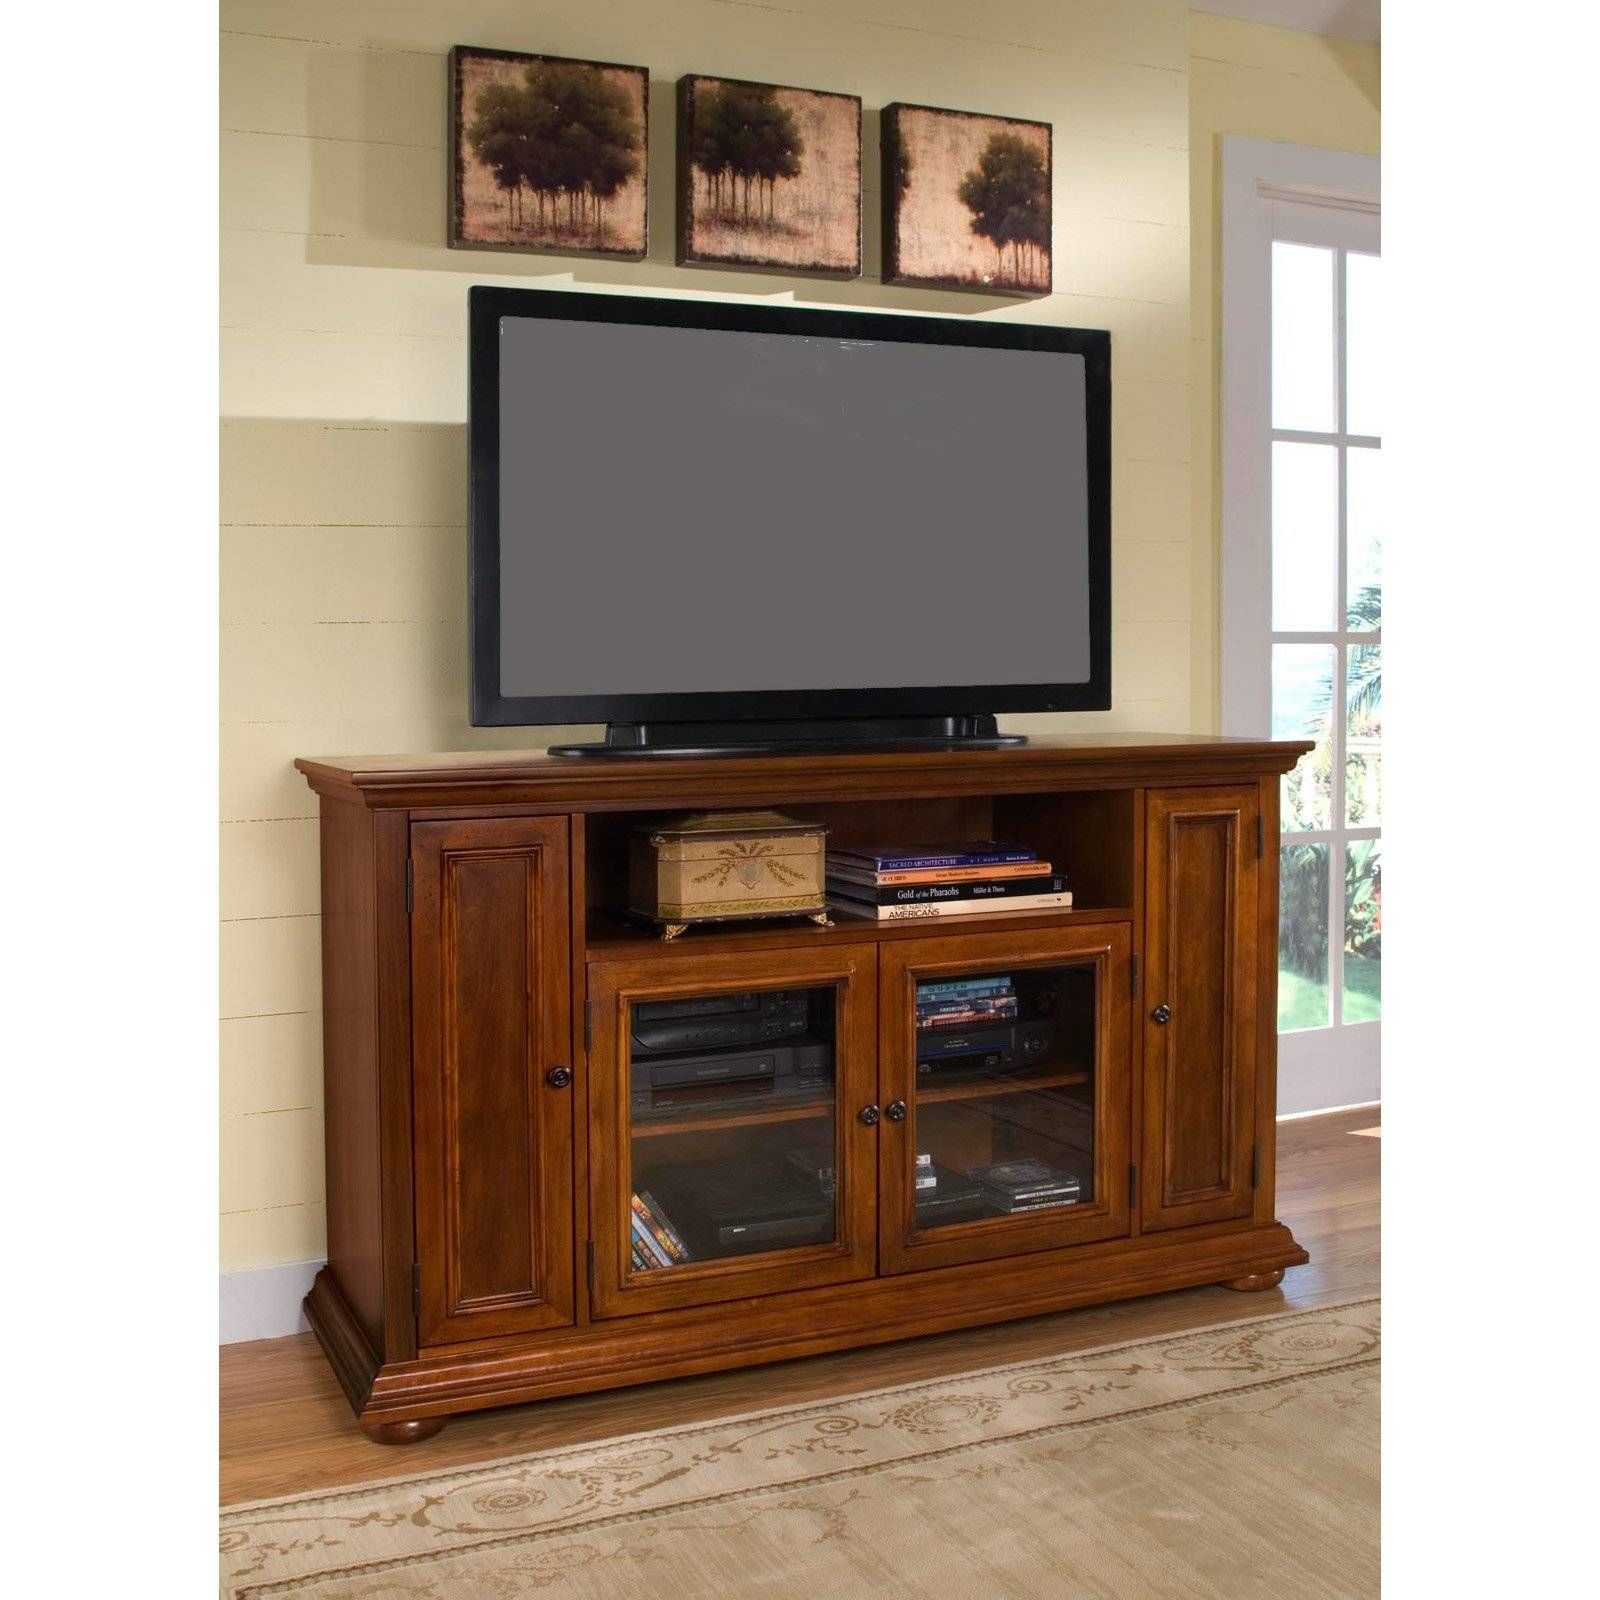 Glossy Brown Enclosed Tv Cabinets For Flat Screens With Doors Pertaining To Enclosed Tv Cabinets For Flat Screens With Doors (View 4 of 15)